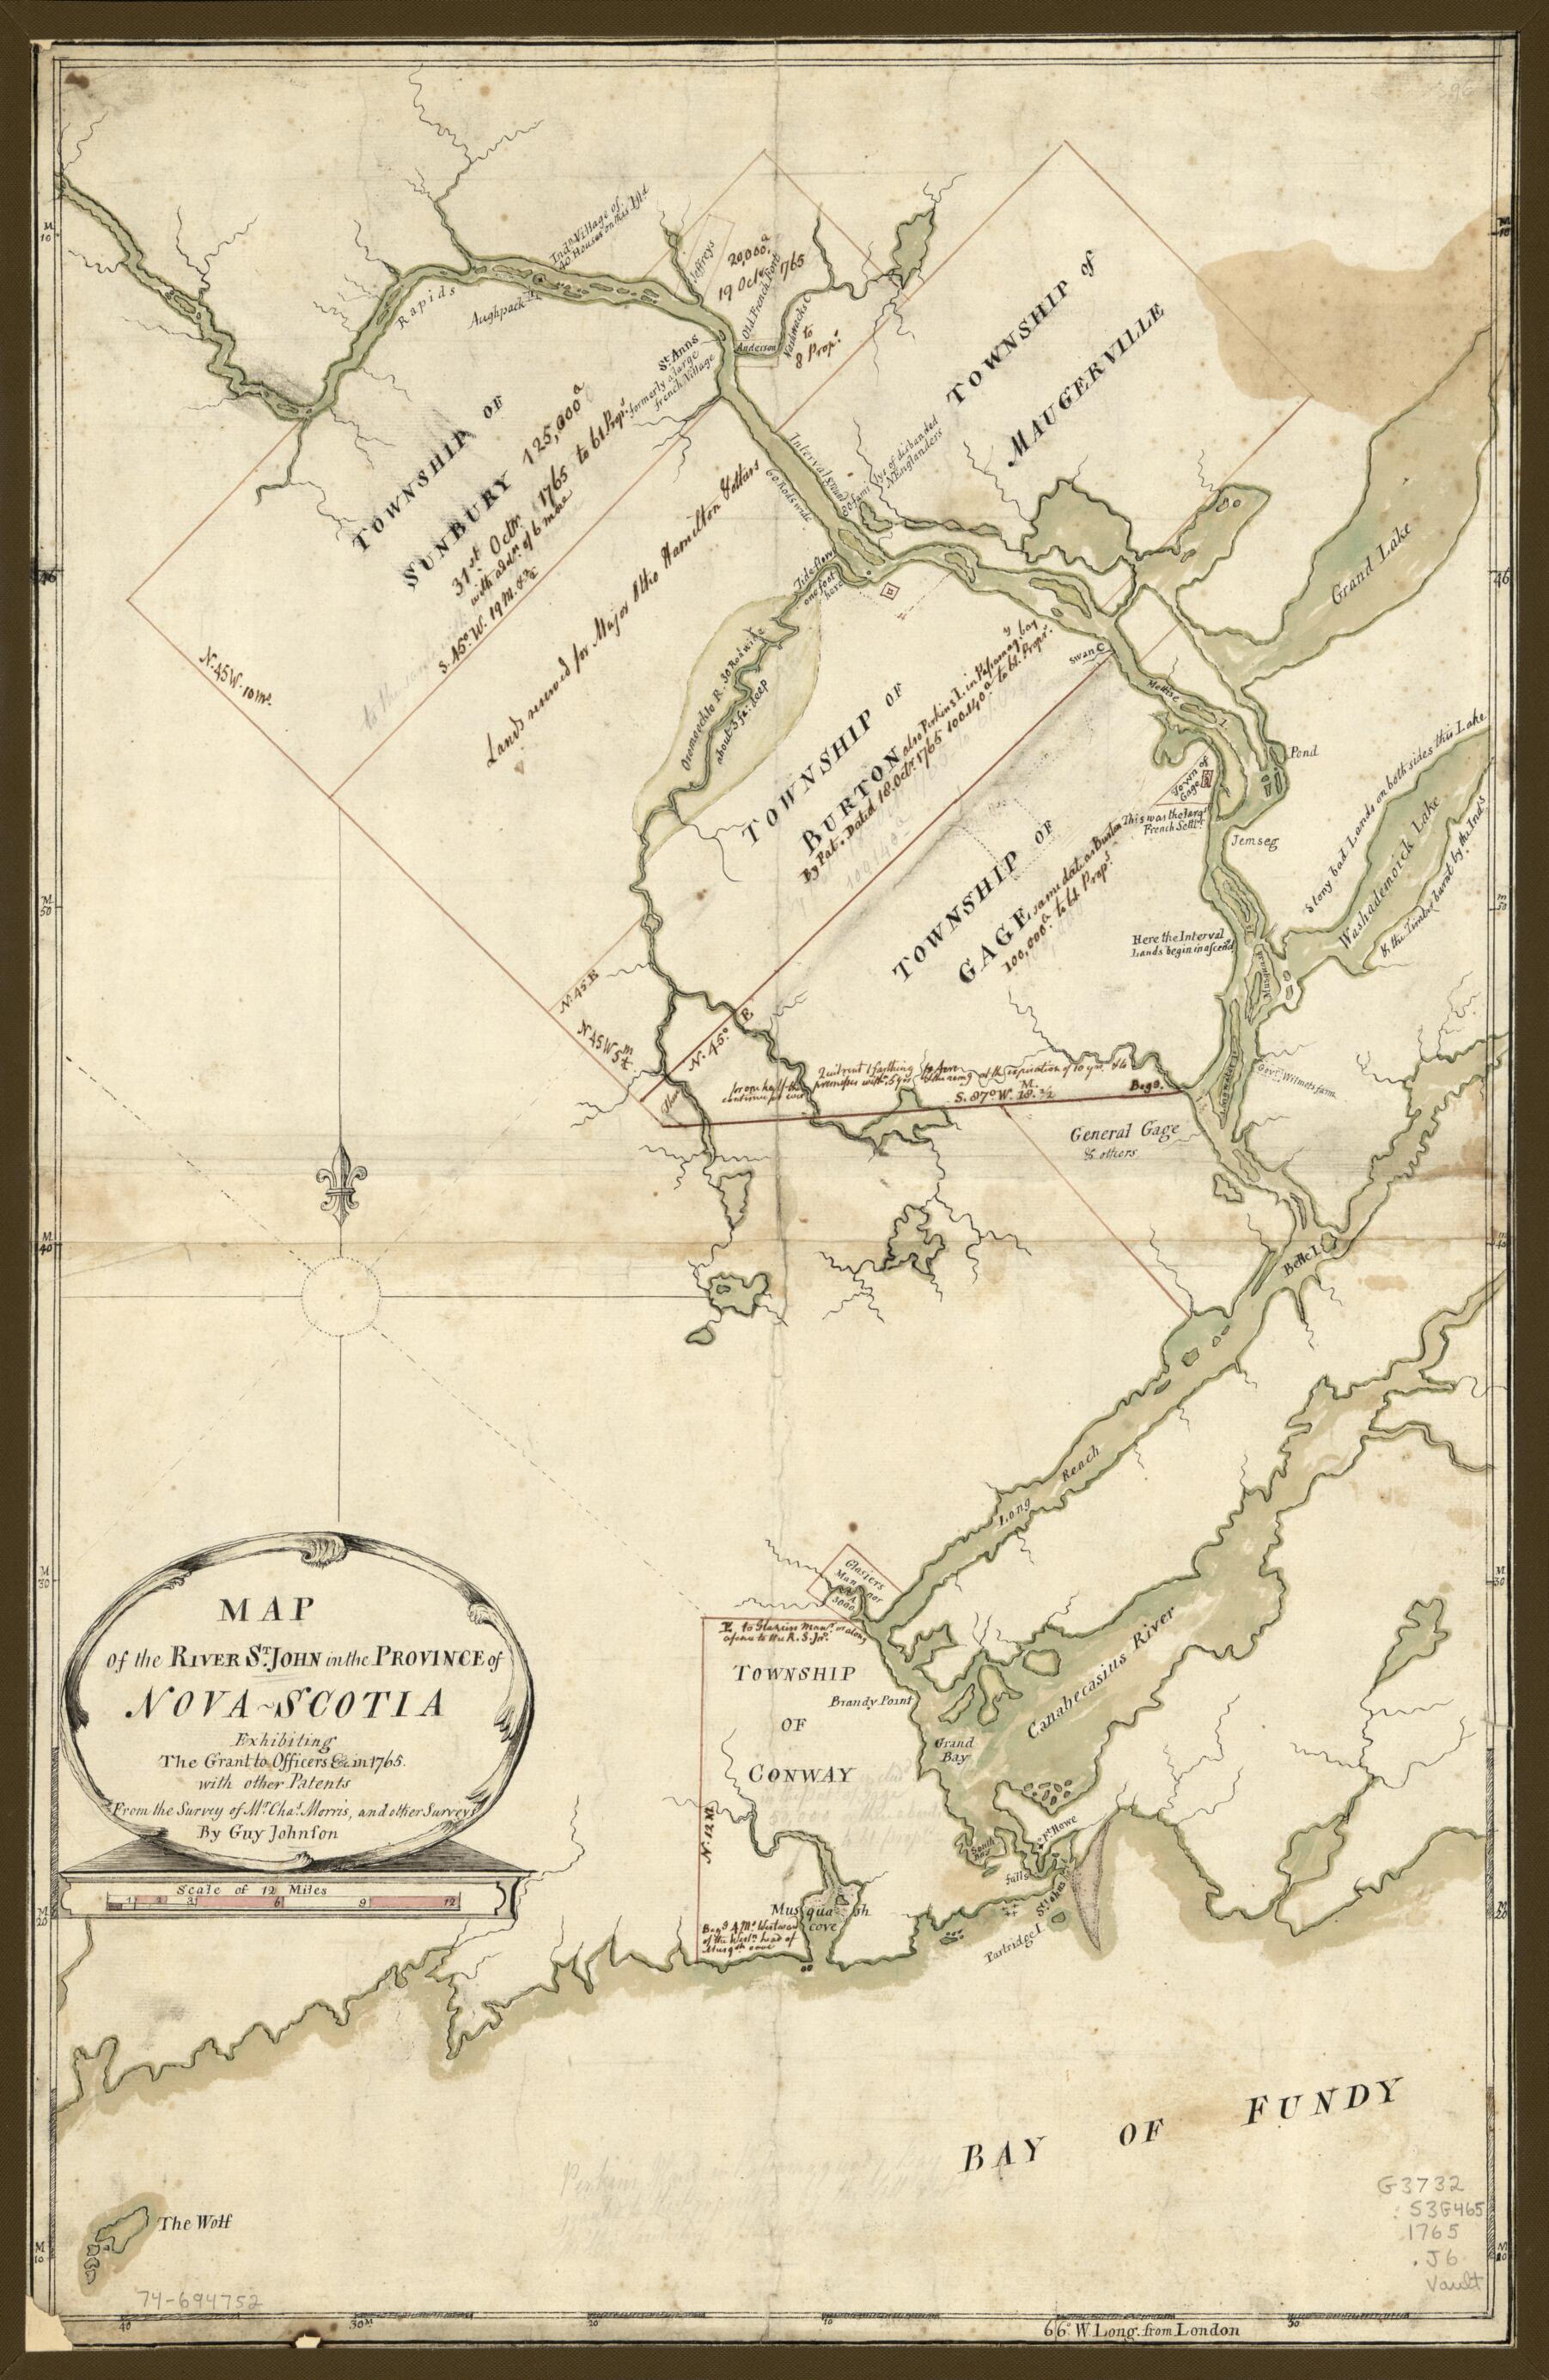 This old map of Map of the River St. John In the Province of Nova Scotia, Exhibiting the Grant to Officers &amp;c. In from 1765, With Other Patents was created by Guy Johnson, Charles Morris in 1765